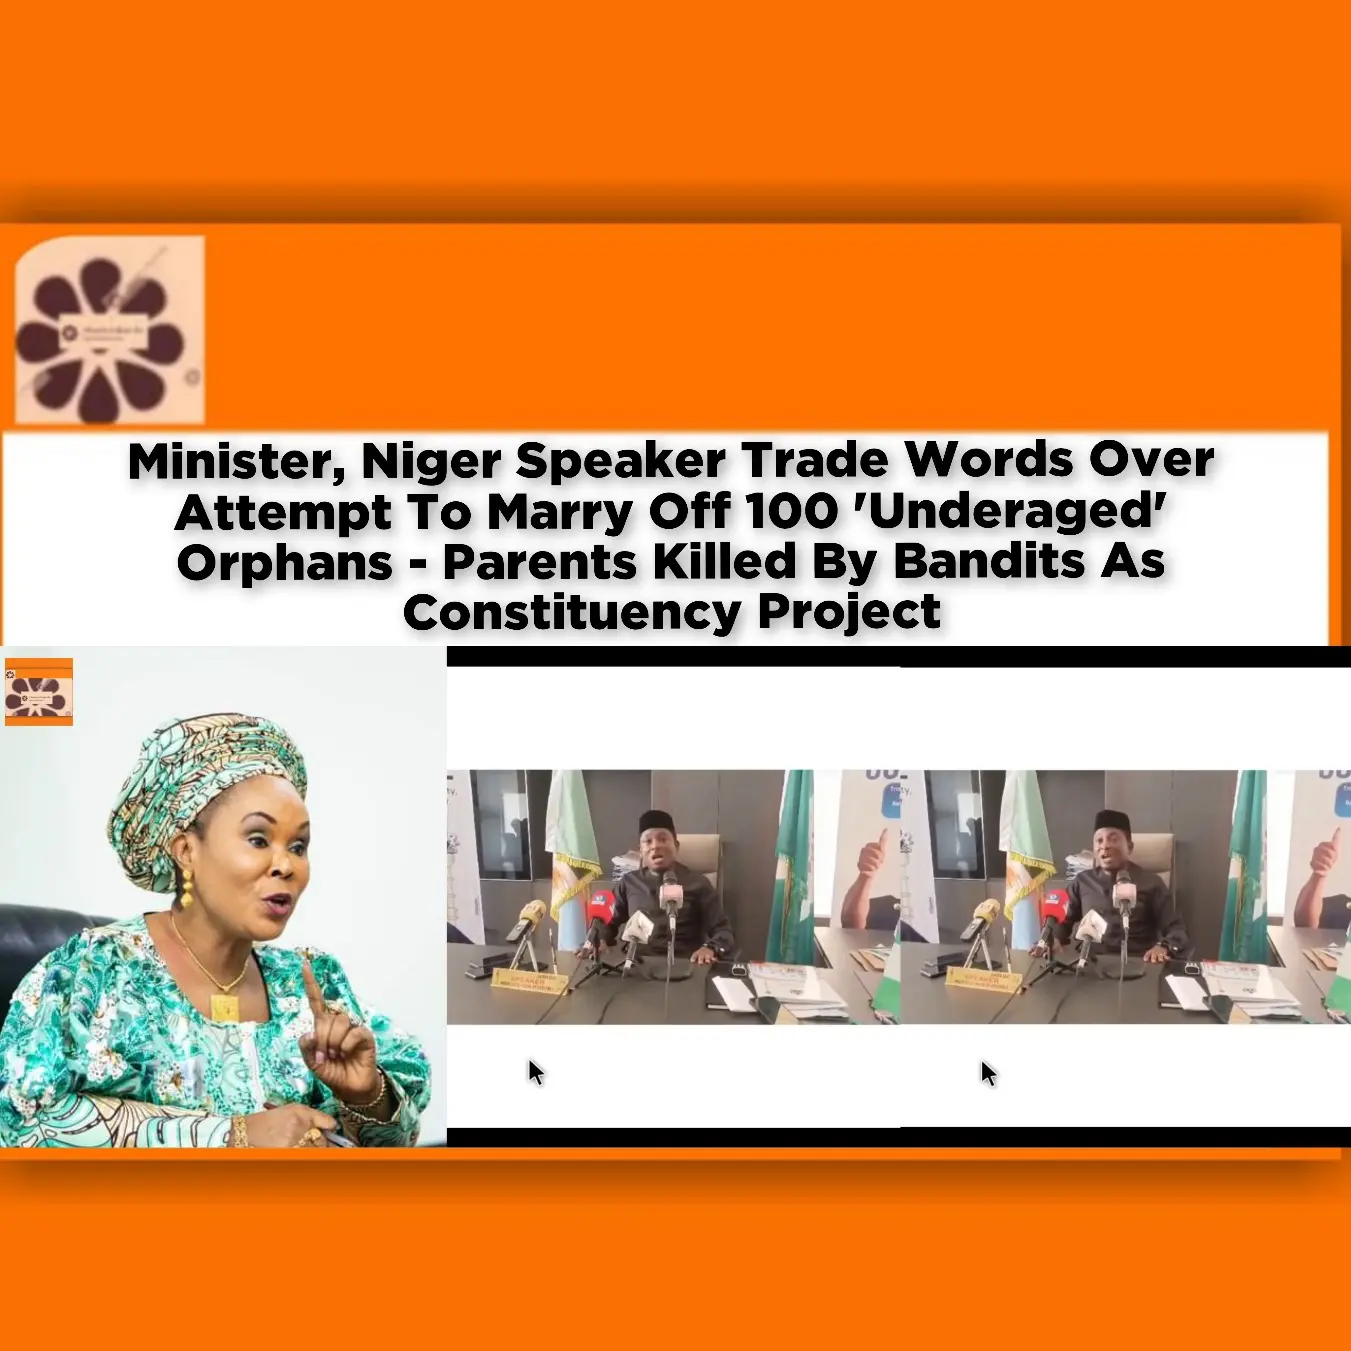 Minister, Niger Speaker Trade Words Over Attempt To Marry Off 100 'Underaged' Orphans - Parents Killed By Bandits As Constituency Project ~ OsazuwaAkonedo #Landlords